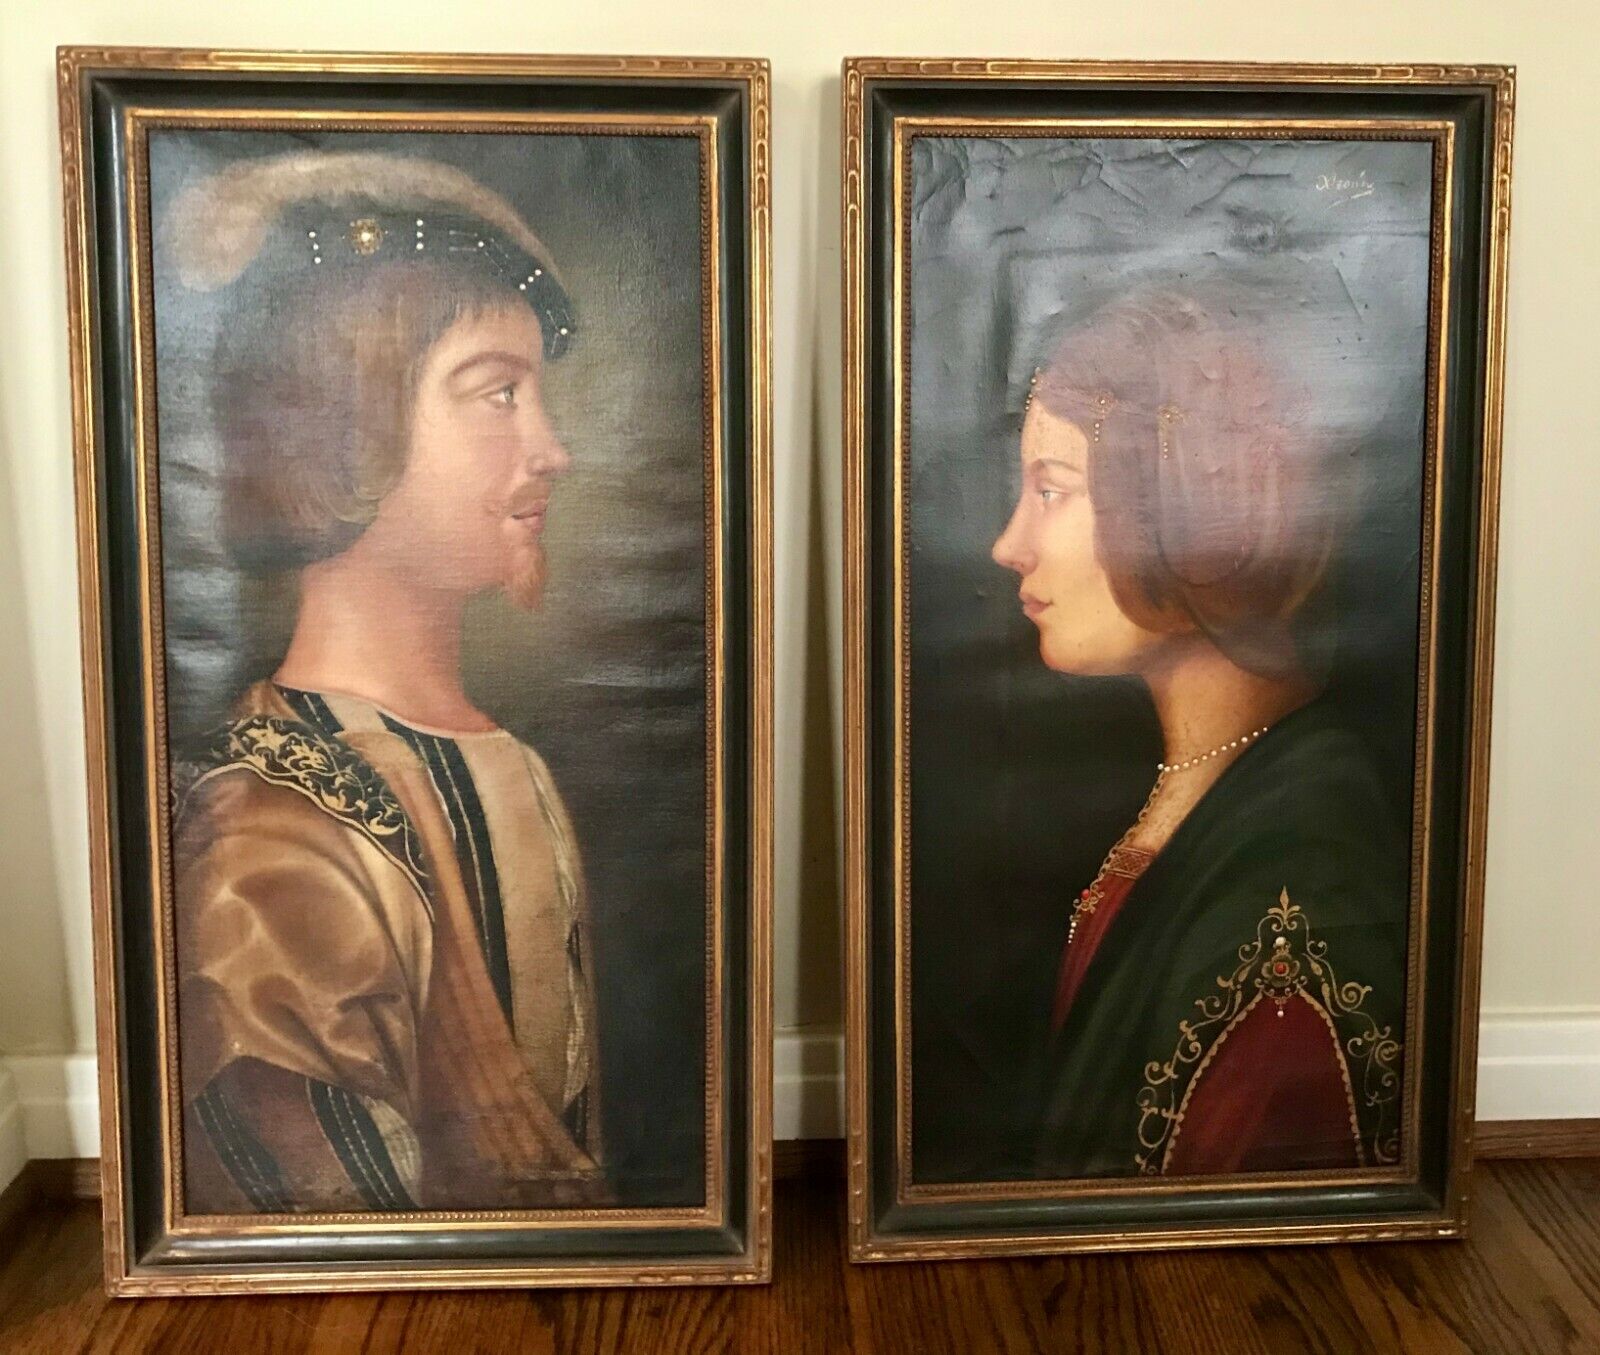 "Prince and Princess" - pair of original oil paintings by Azarin of Peru Без бренда